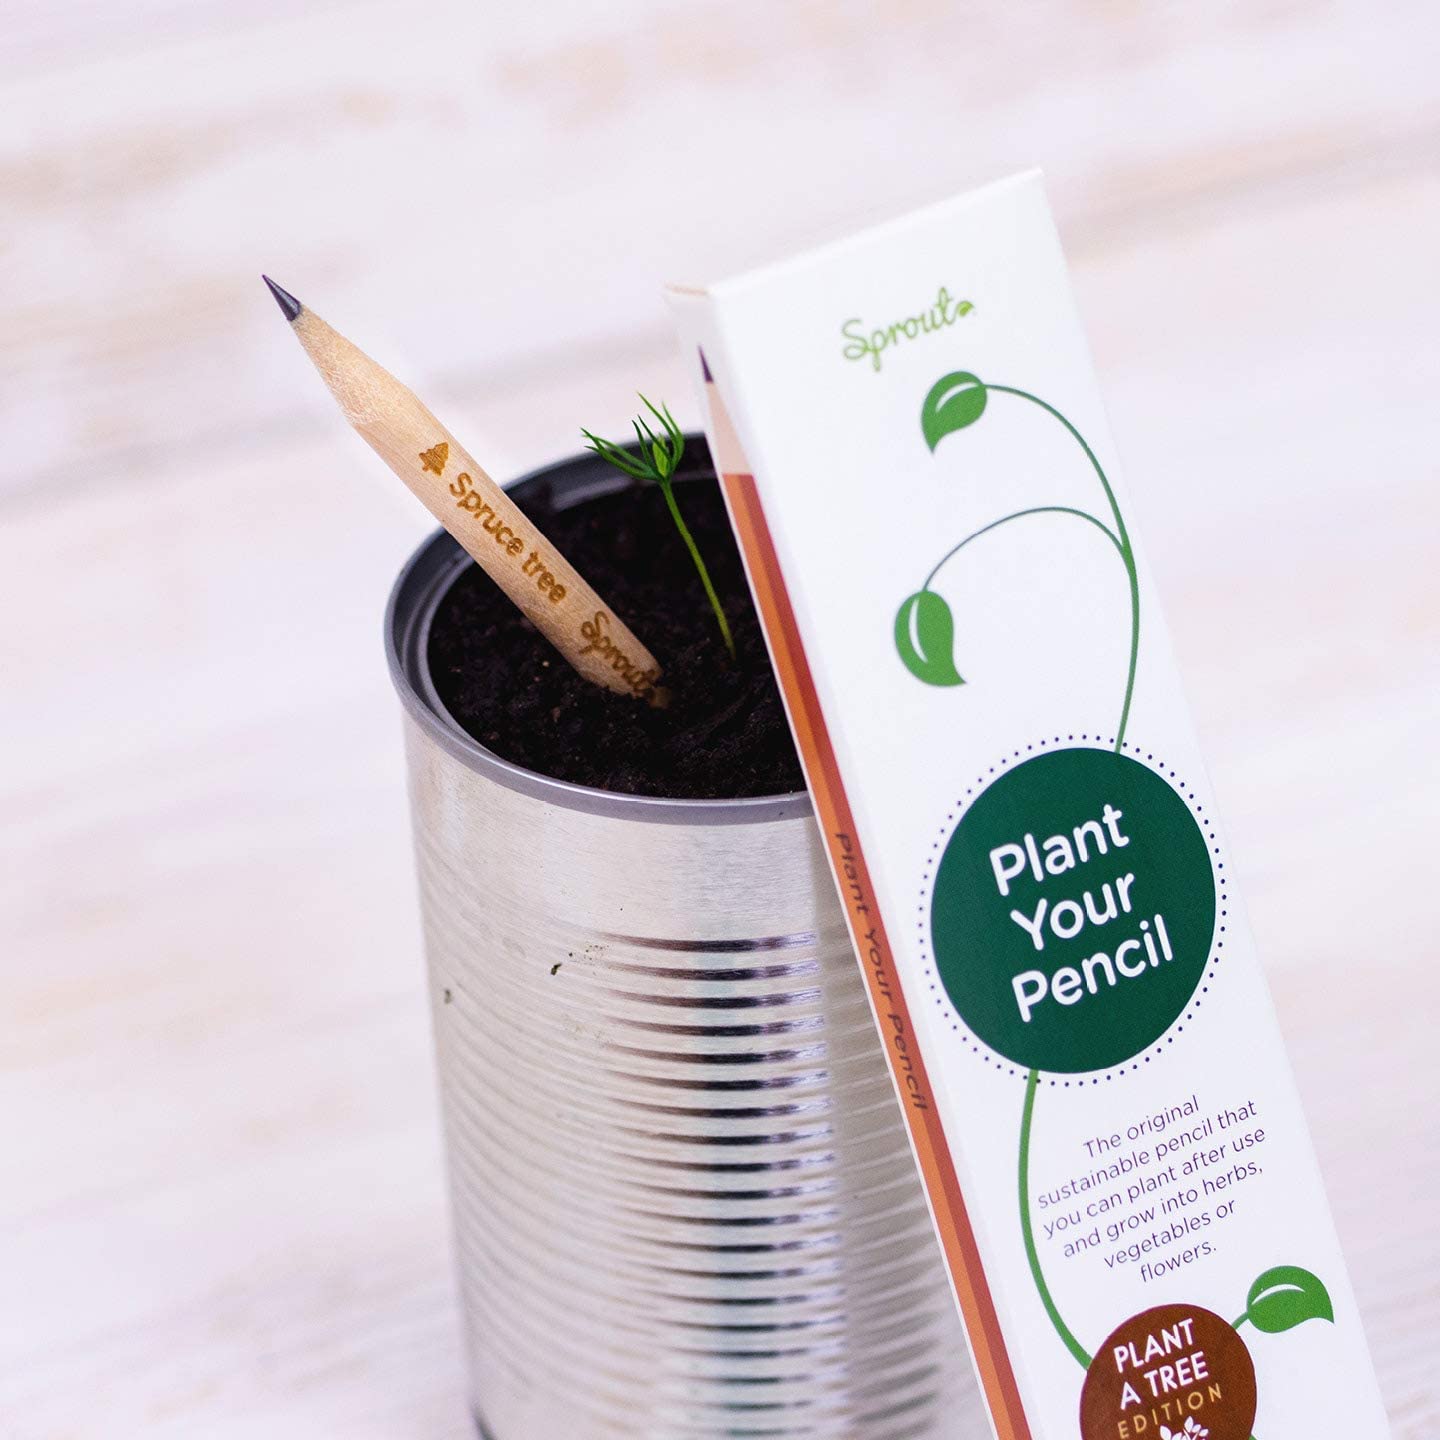 Eco-friendly school supplies - plantable pencil shown in container of soil growing